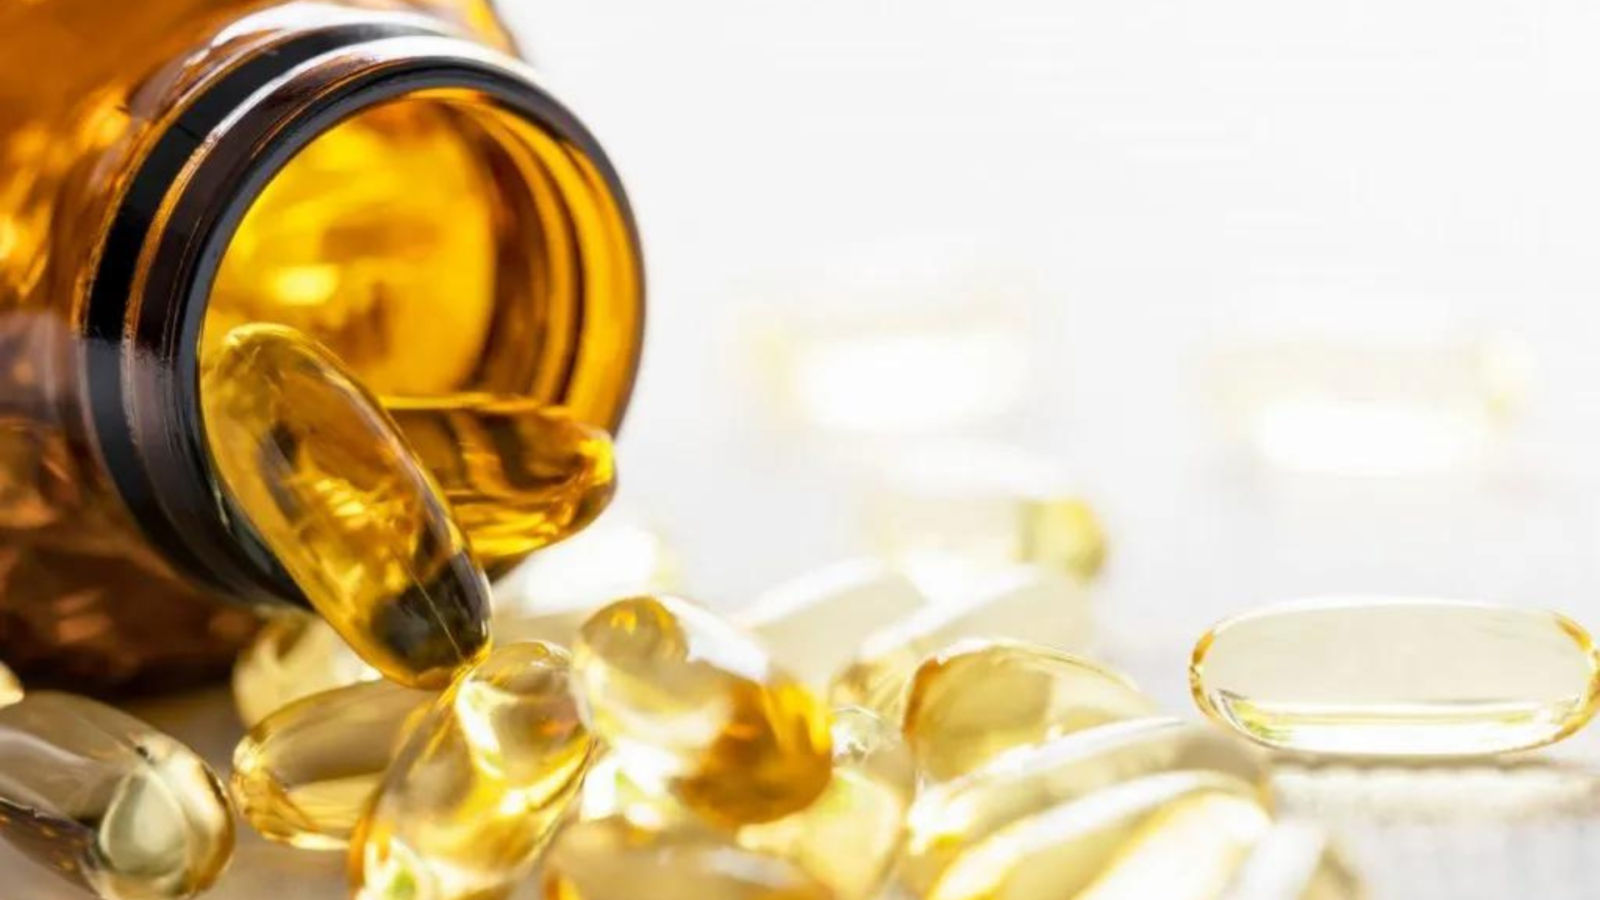 Science says climate change might impact the availability of your favourite Omega-3 sources and supplements